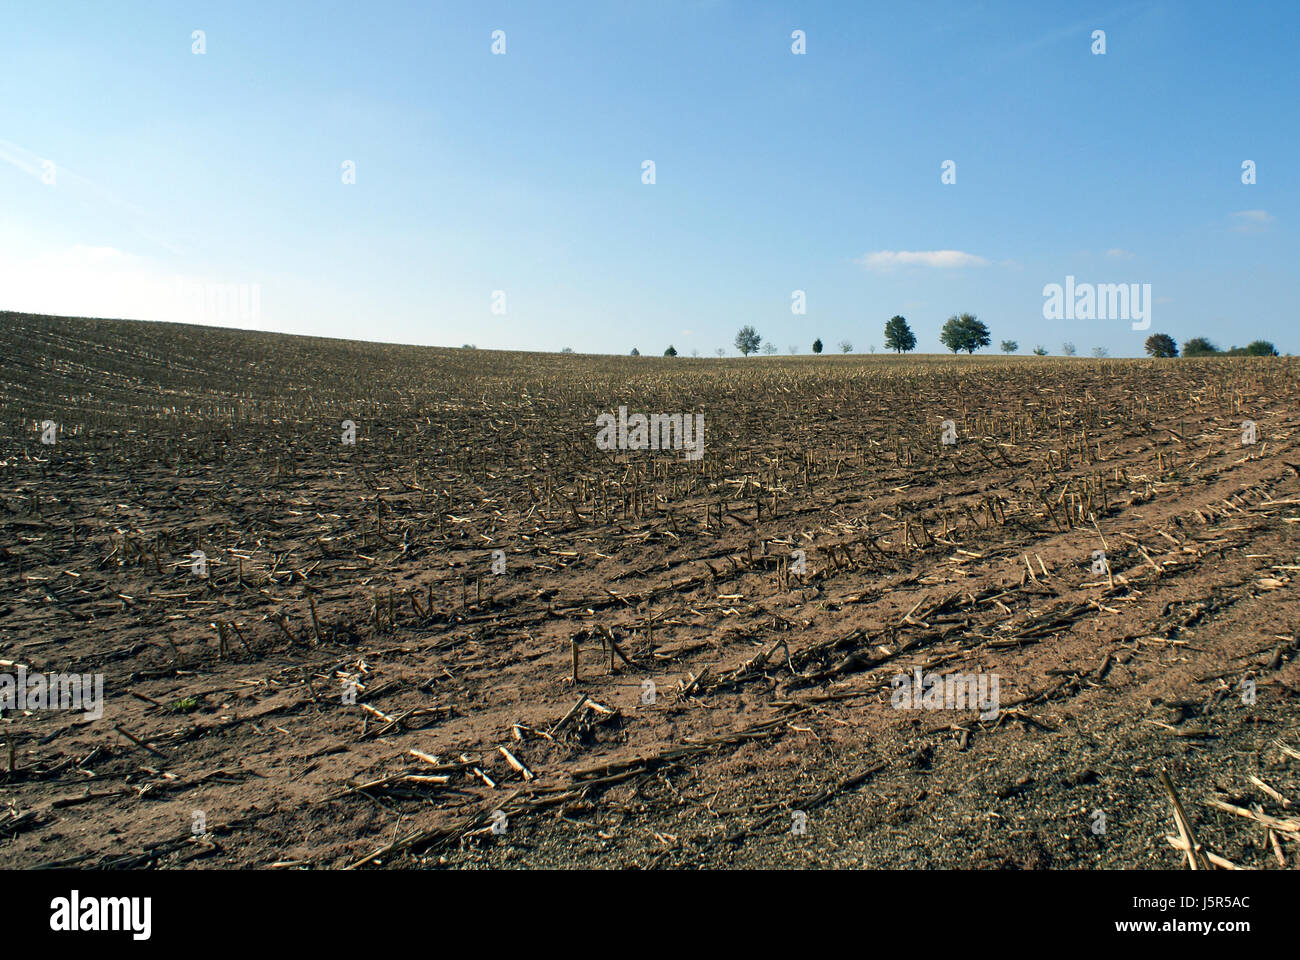 tree trees horizon agriculture farming field acre stubble field harvested Stock Photo